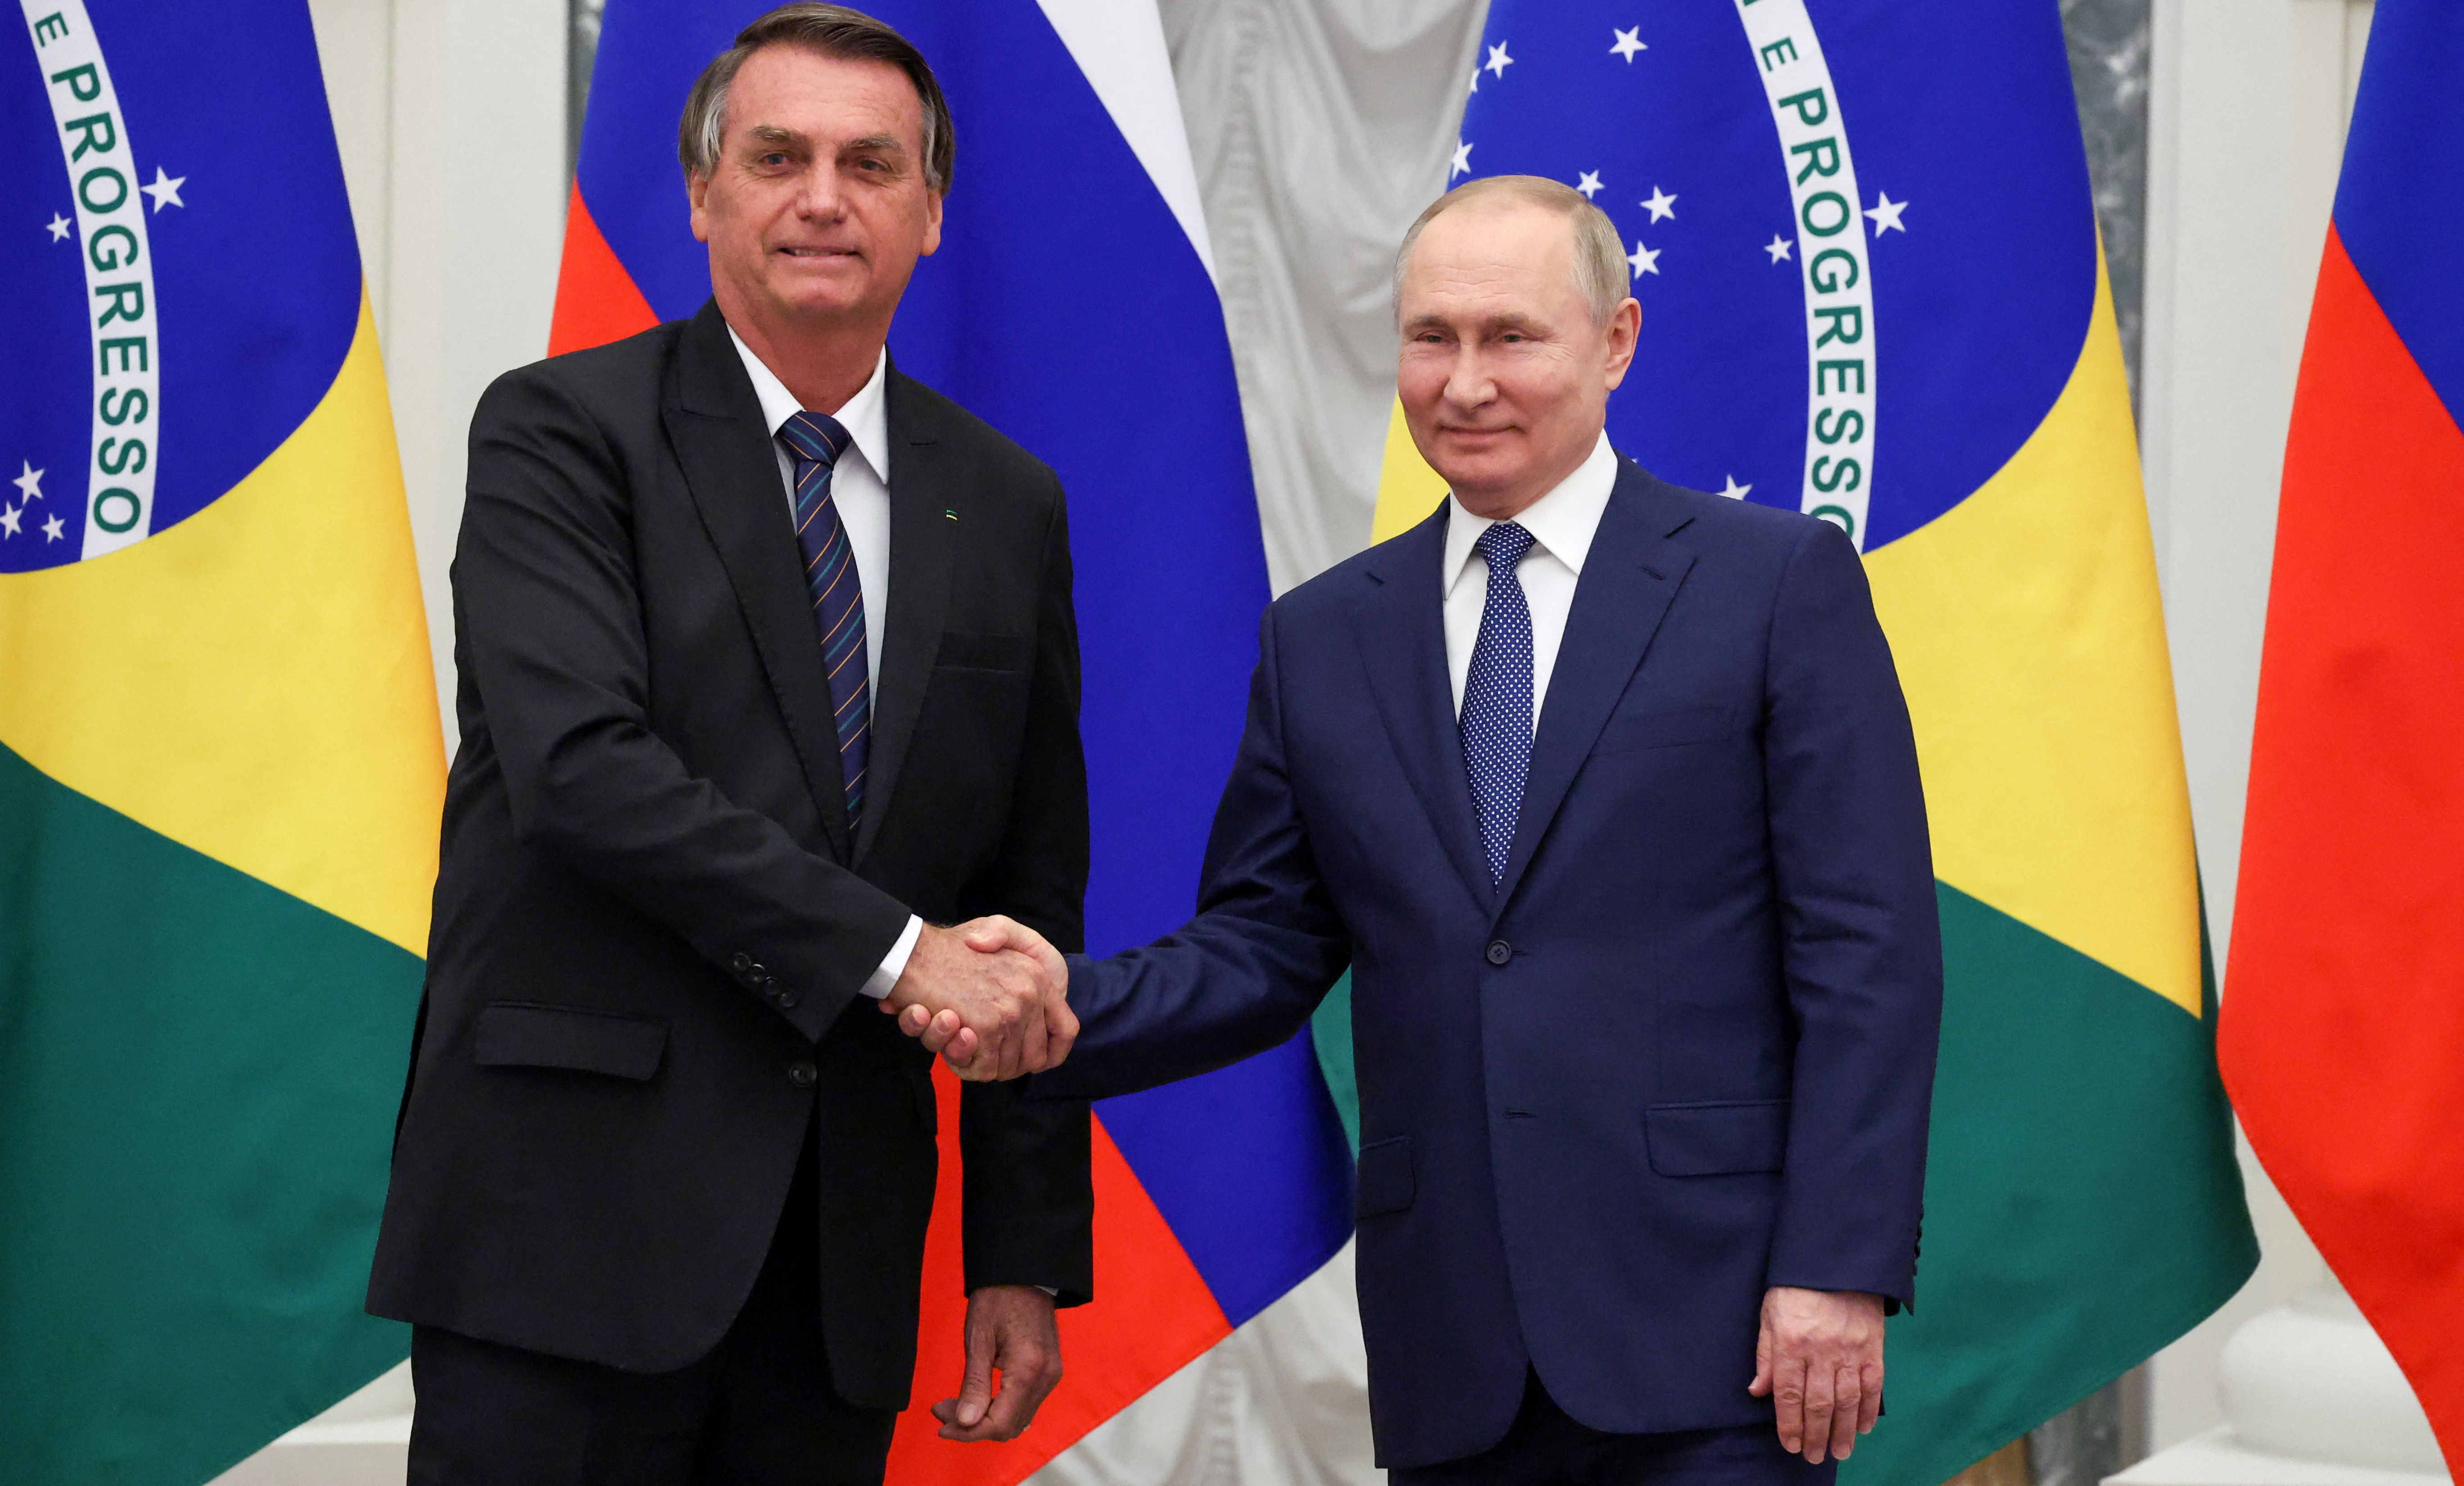 Russian President Putin and his Brazilian counterpart Bolsonaro attend a news conference in Moscow